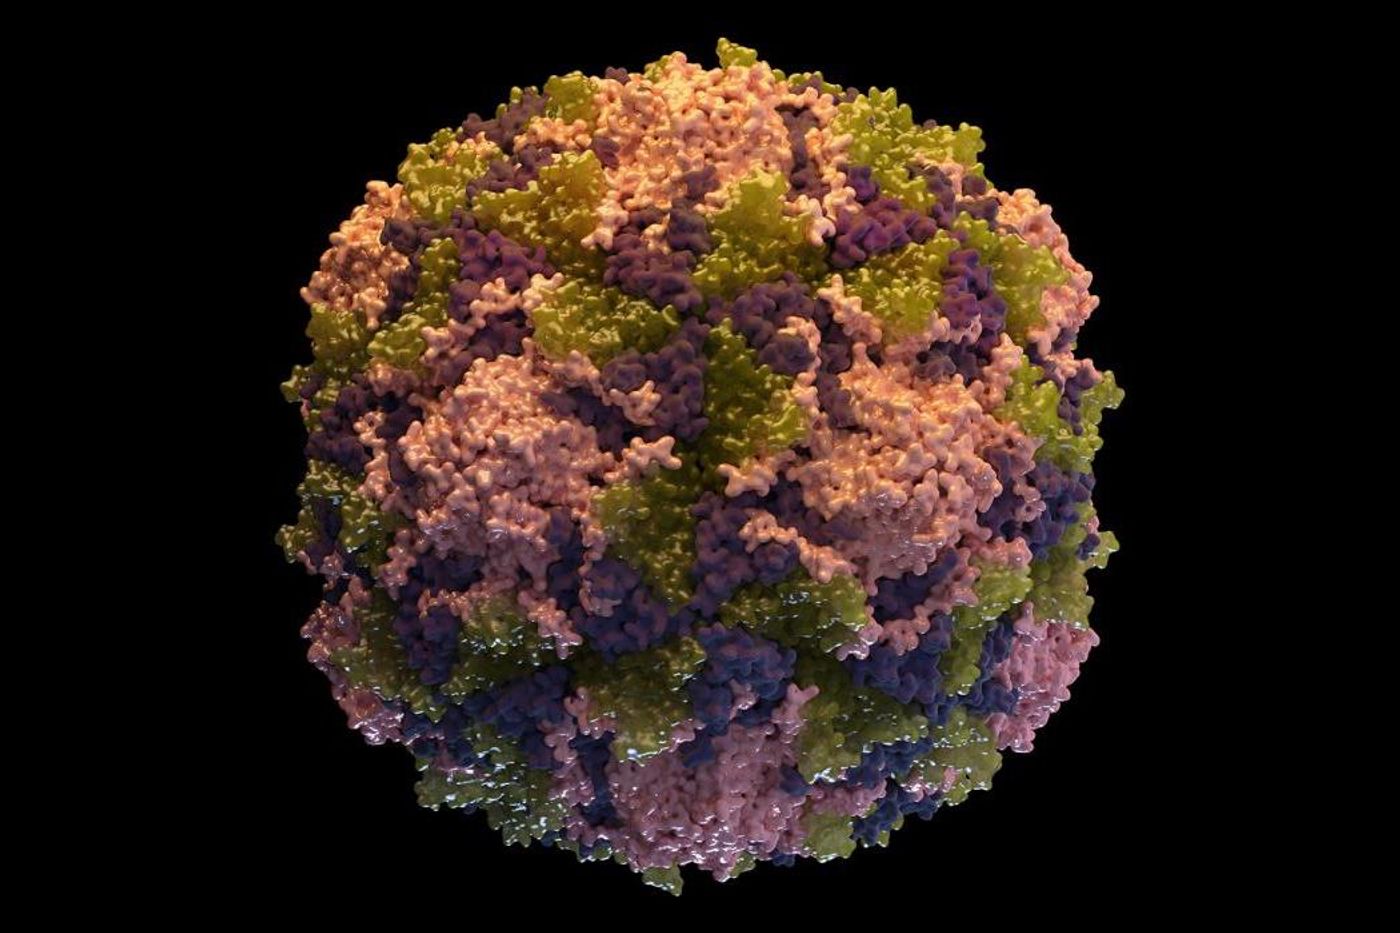 A 3D graphical illustration of a poliovirus particle that consists of 60 copies each of capsid polypeptides designated as VP (viral protein) 1 (Pink), VP2 (Green), VP3(Purple) and VP4 (not shown). Credit: CDC/ Sarah Poser